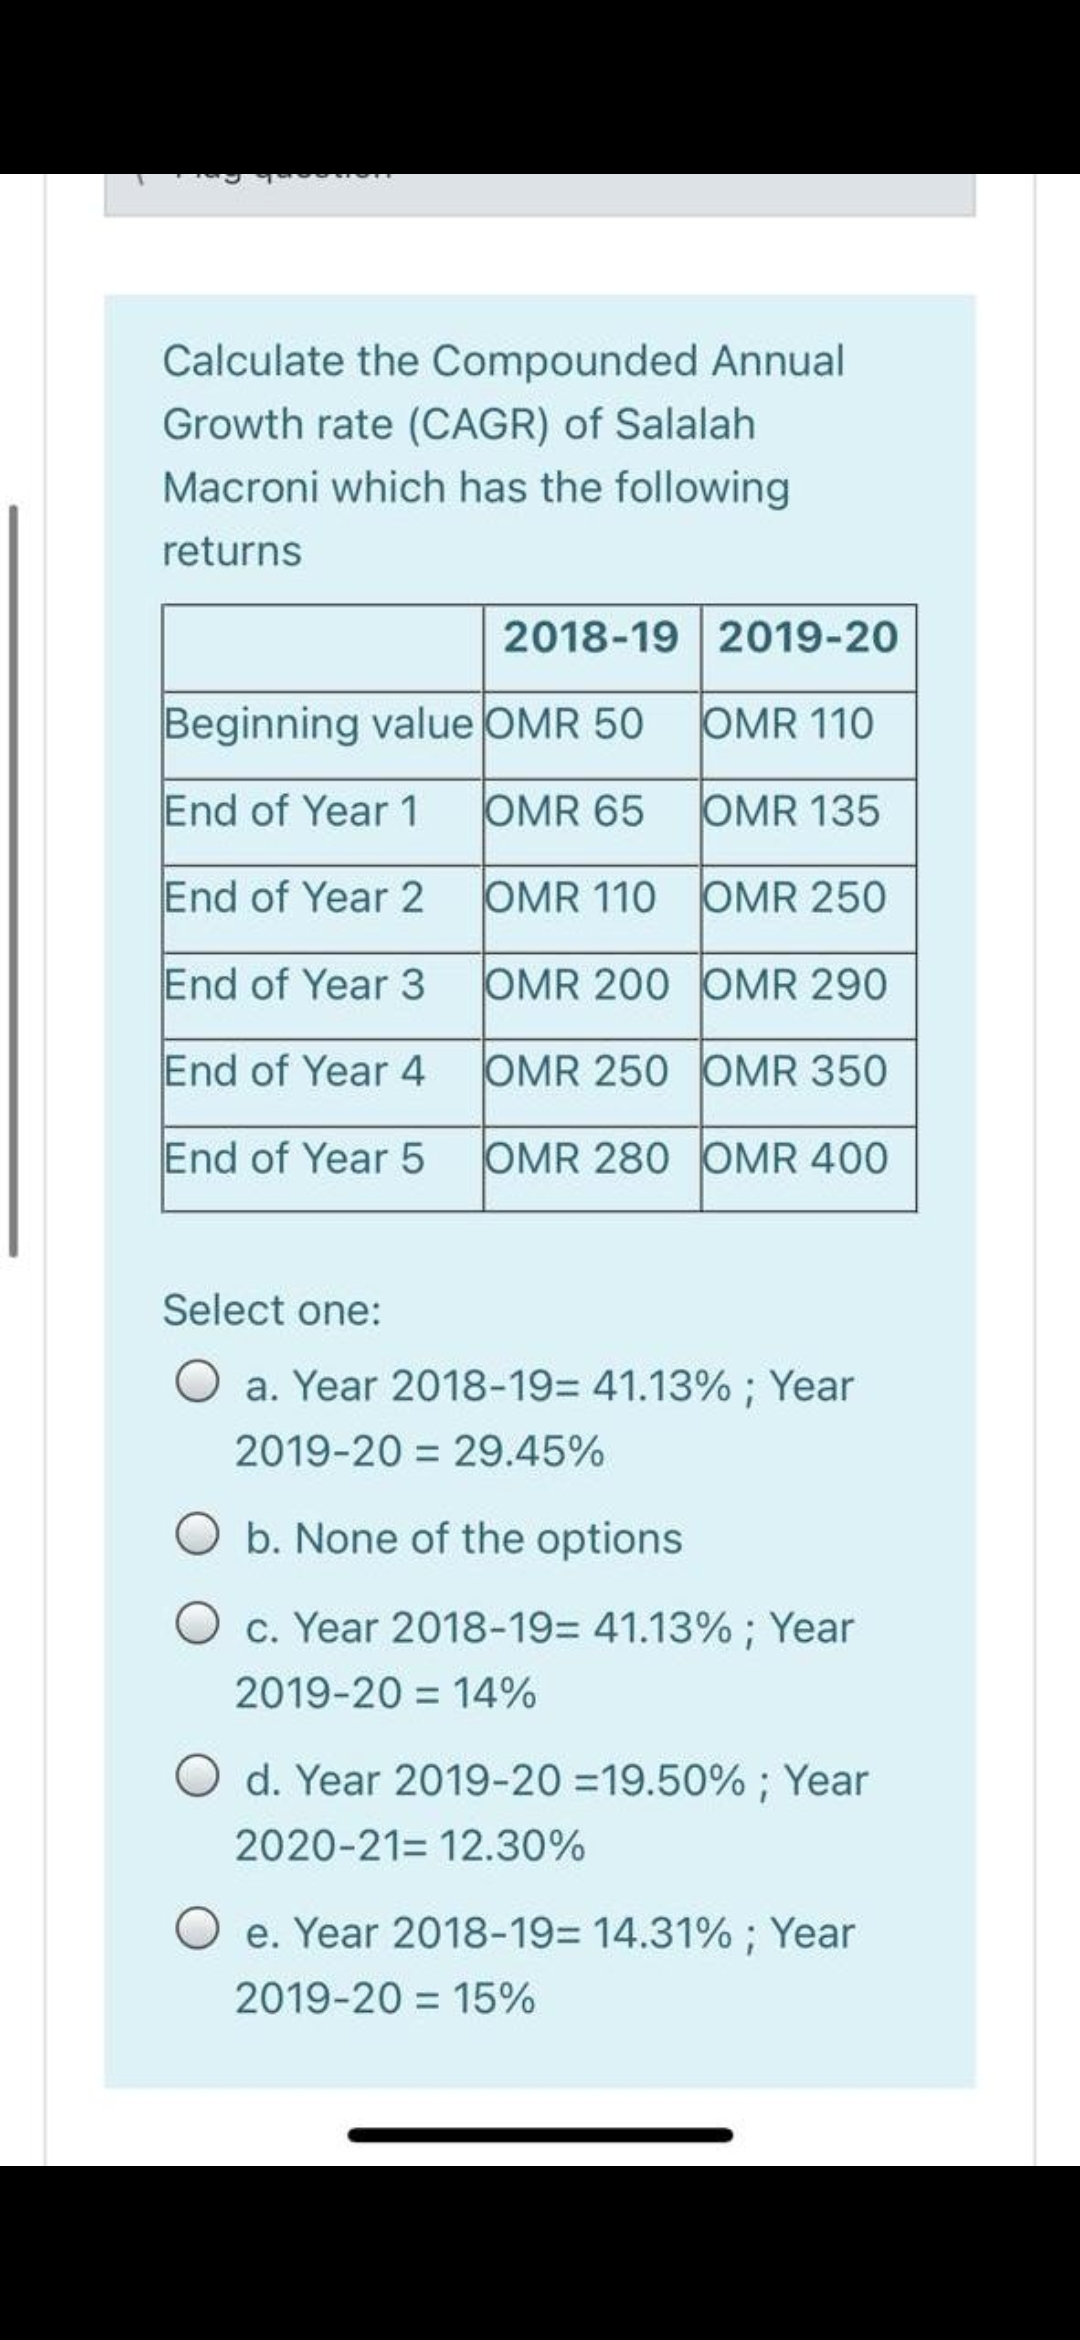 Calculate the Compounded Annual
Growth rate (CAGR) of Salalah
Macroni which has the following
returns
2018-19 2019-20
Beginning value OMR 50
OMR 110
End of Year 1
OMR 65
OMR 135
End of Year 2
OMR 110 OMR 250
End of Year 3
OMR 200 OMR 290
End of Year 4
OMR 250 OMR 350
End of Year 5
OMR 280 OMR 400
Select one:
a. Year 2018-193D 41.13% ; Year
2019-20 = 29.45%
b. None of the options
c. Year 2018-193 41.13% ; Year
2019-20 = 14%
O d. Year 2019-20 =19.50% ; Year
2020-21= 12.30%
e. Year 2018-19%3D14.31% ; Year
2019-20 = 15%
%3D
